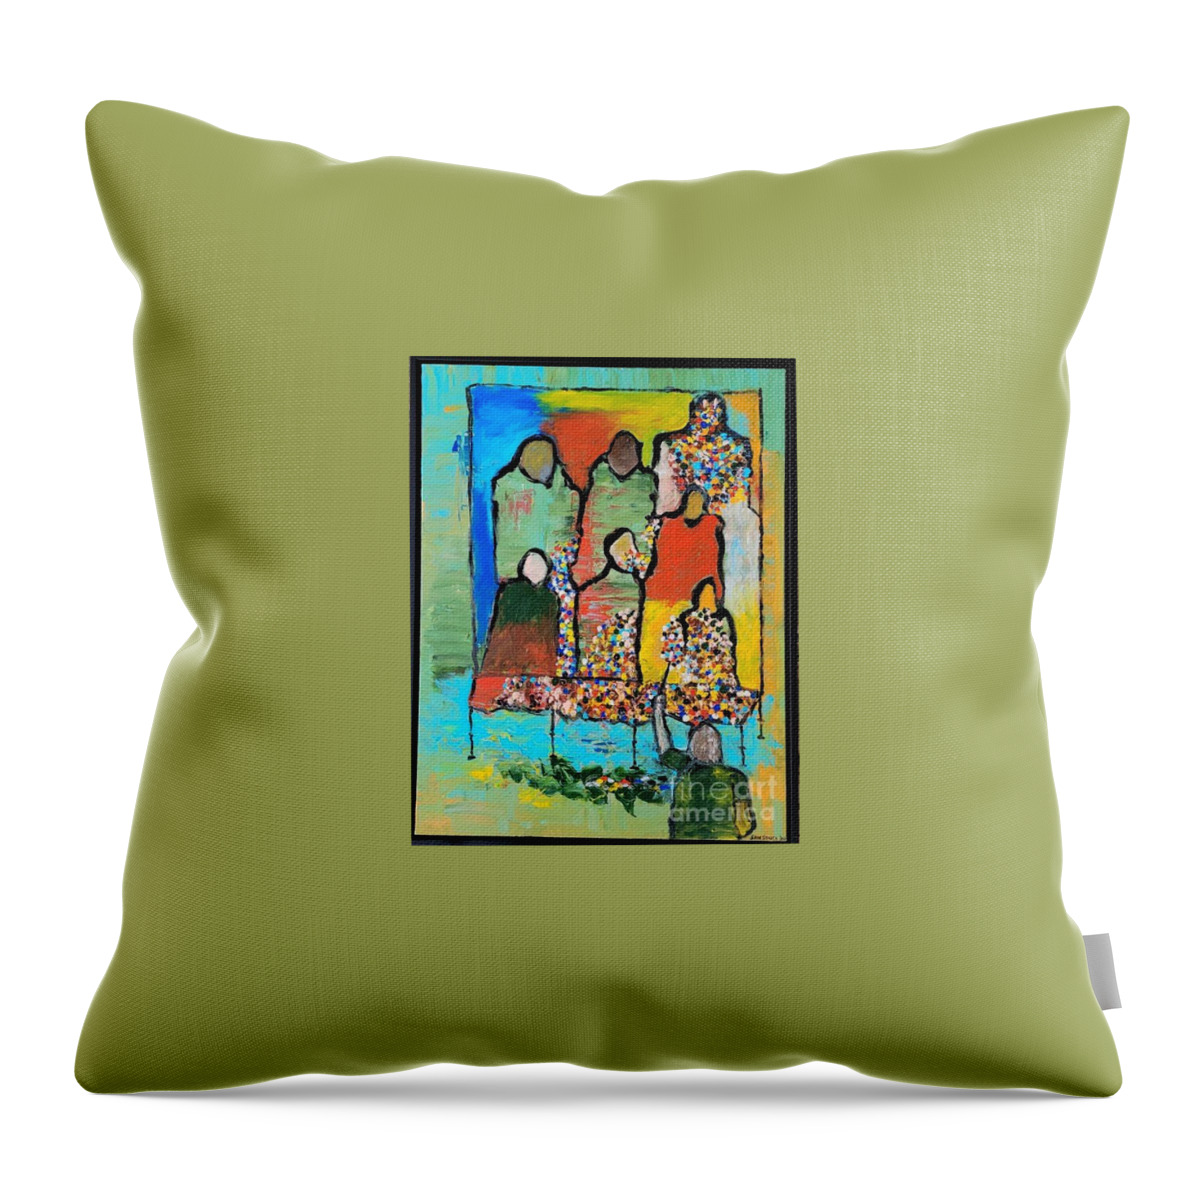  Throw Pillow featuring the painting The Artist at Work by Mark SanSouci